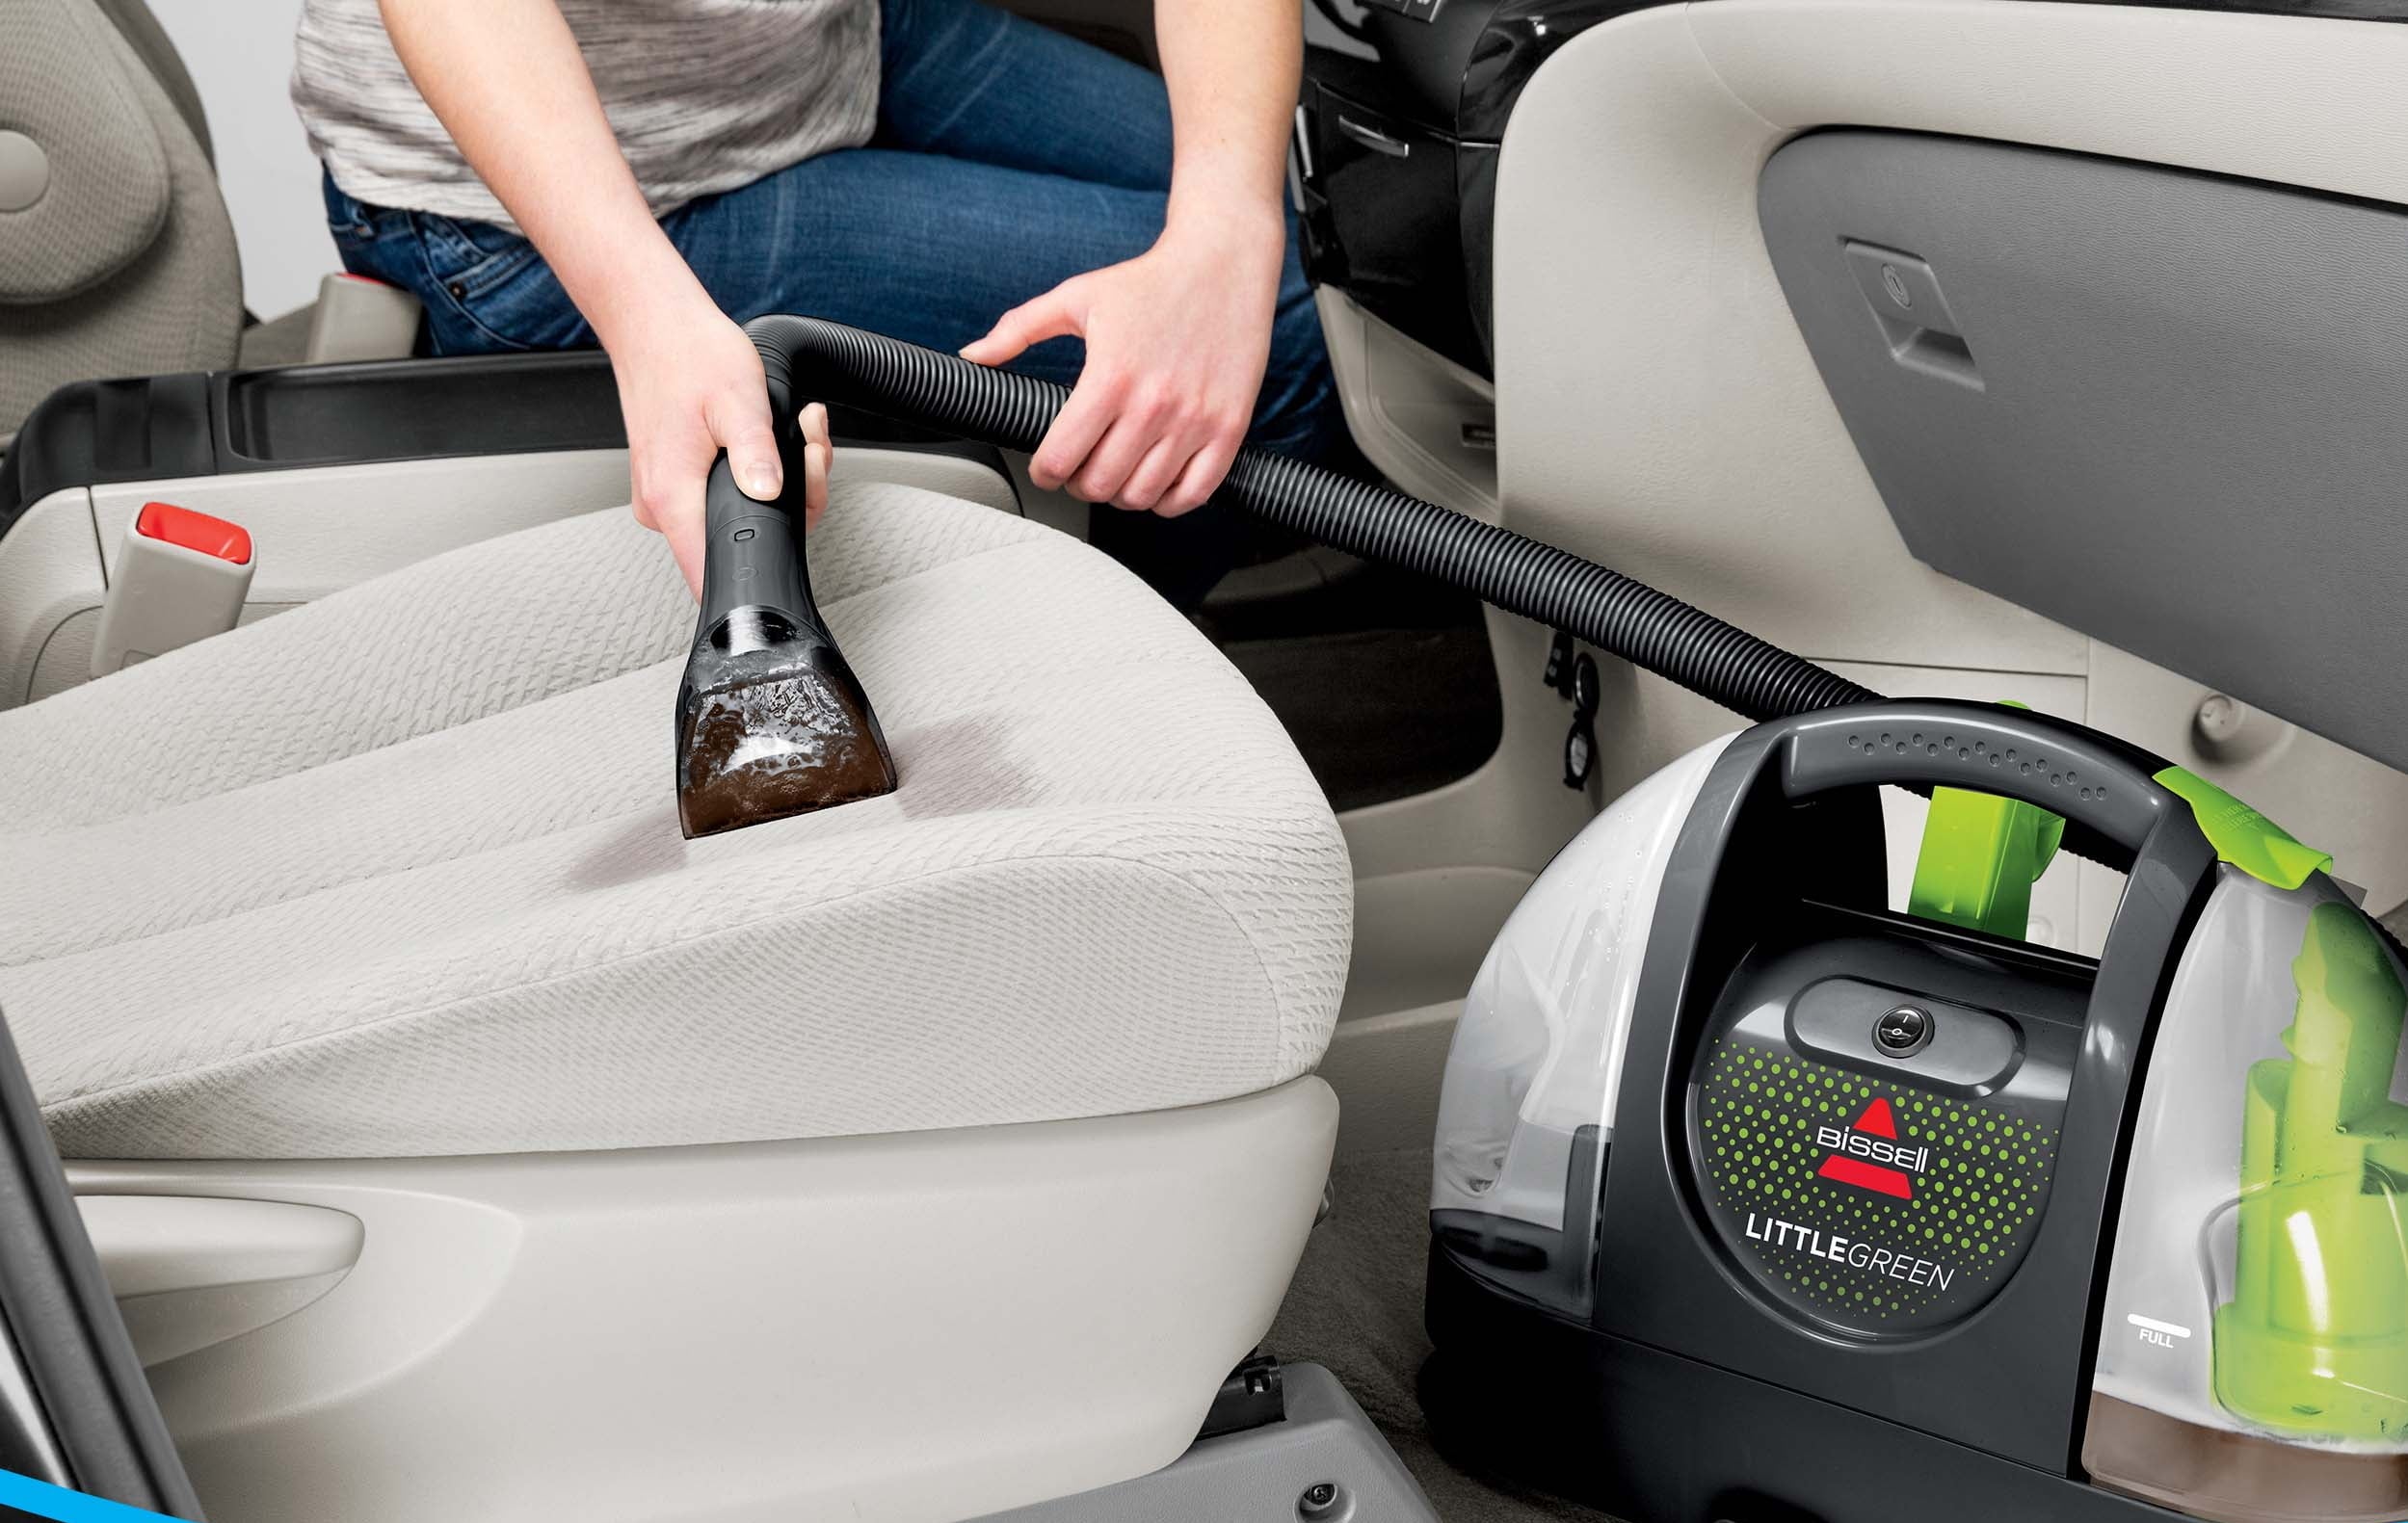 Model cleaning a car seat using a portable carpet cleaner with the text &quot;Strong Spray &amp;amp; Suction&quot;